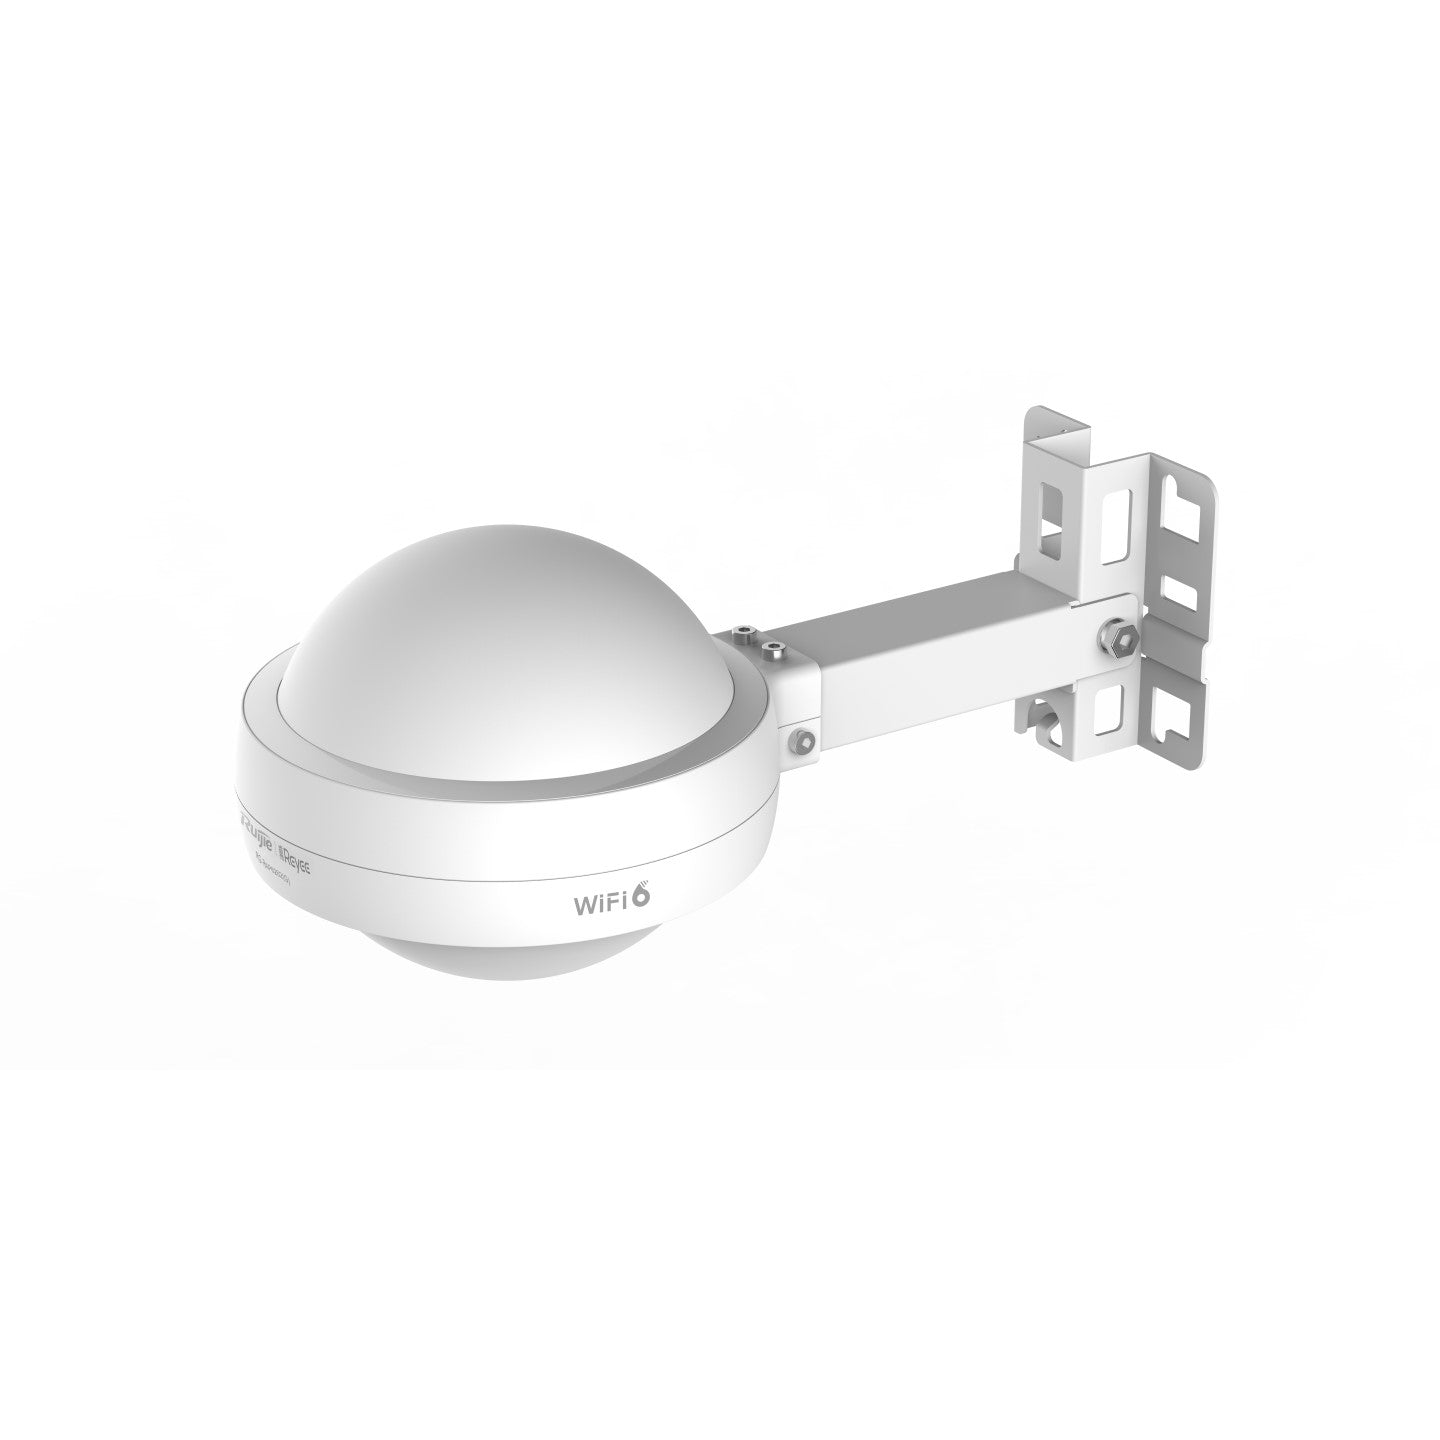 RG-RAP6262(G) Wi-Fi 6 AX1800 Outdoor Omni-directional Access Point